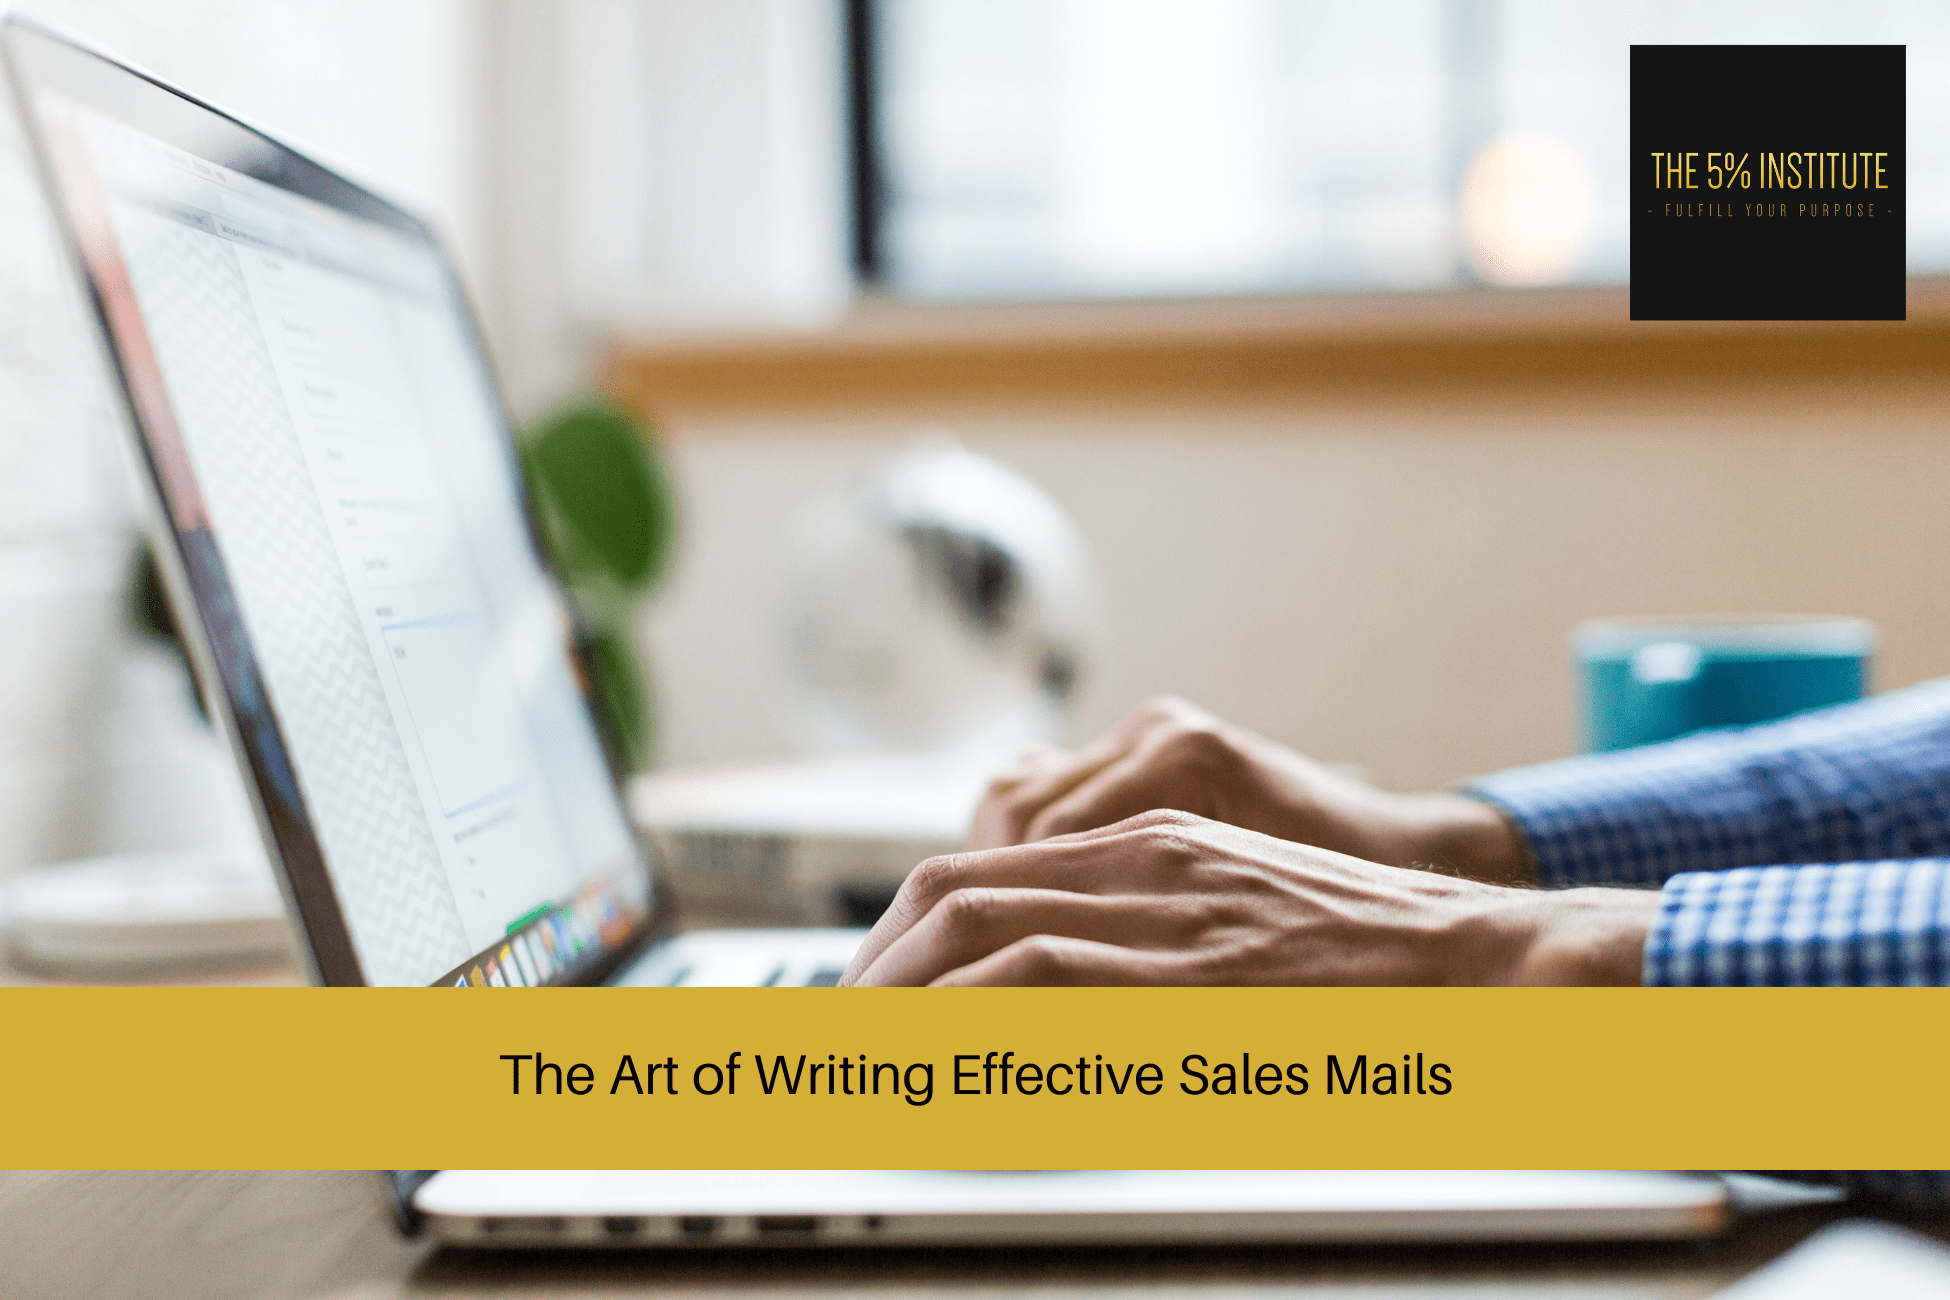 The Art of Writing Effective Sales Mails